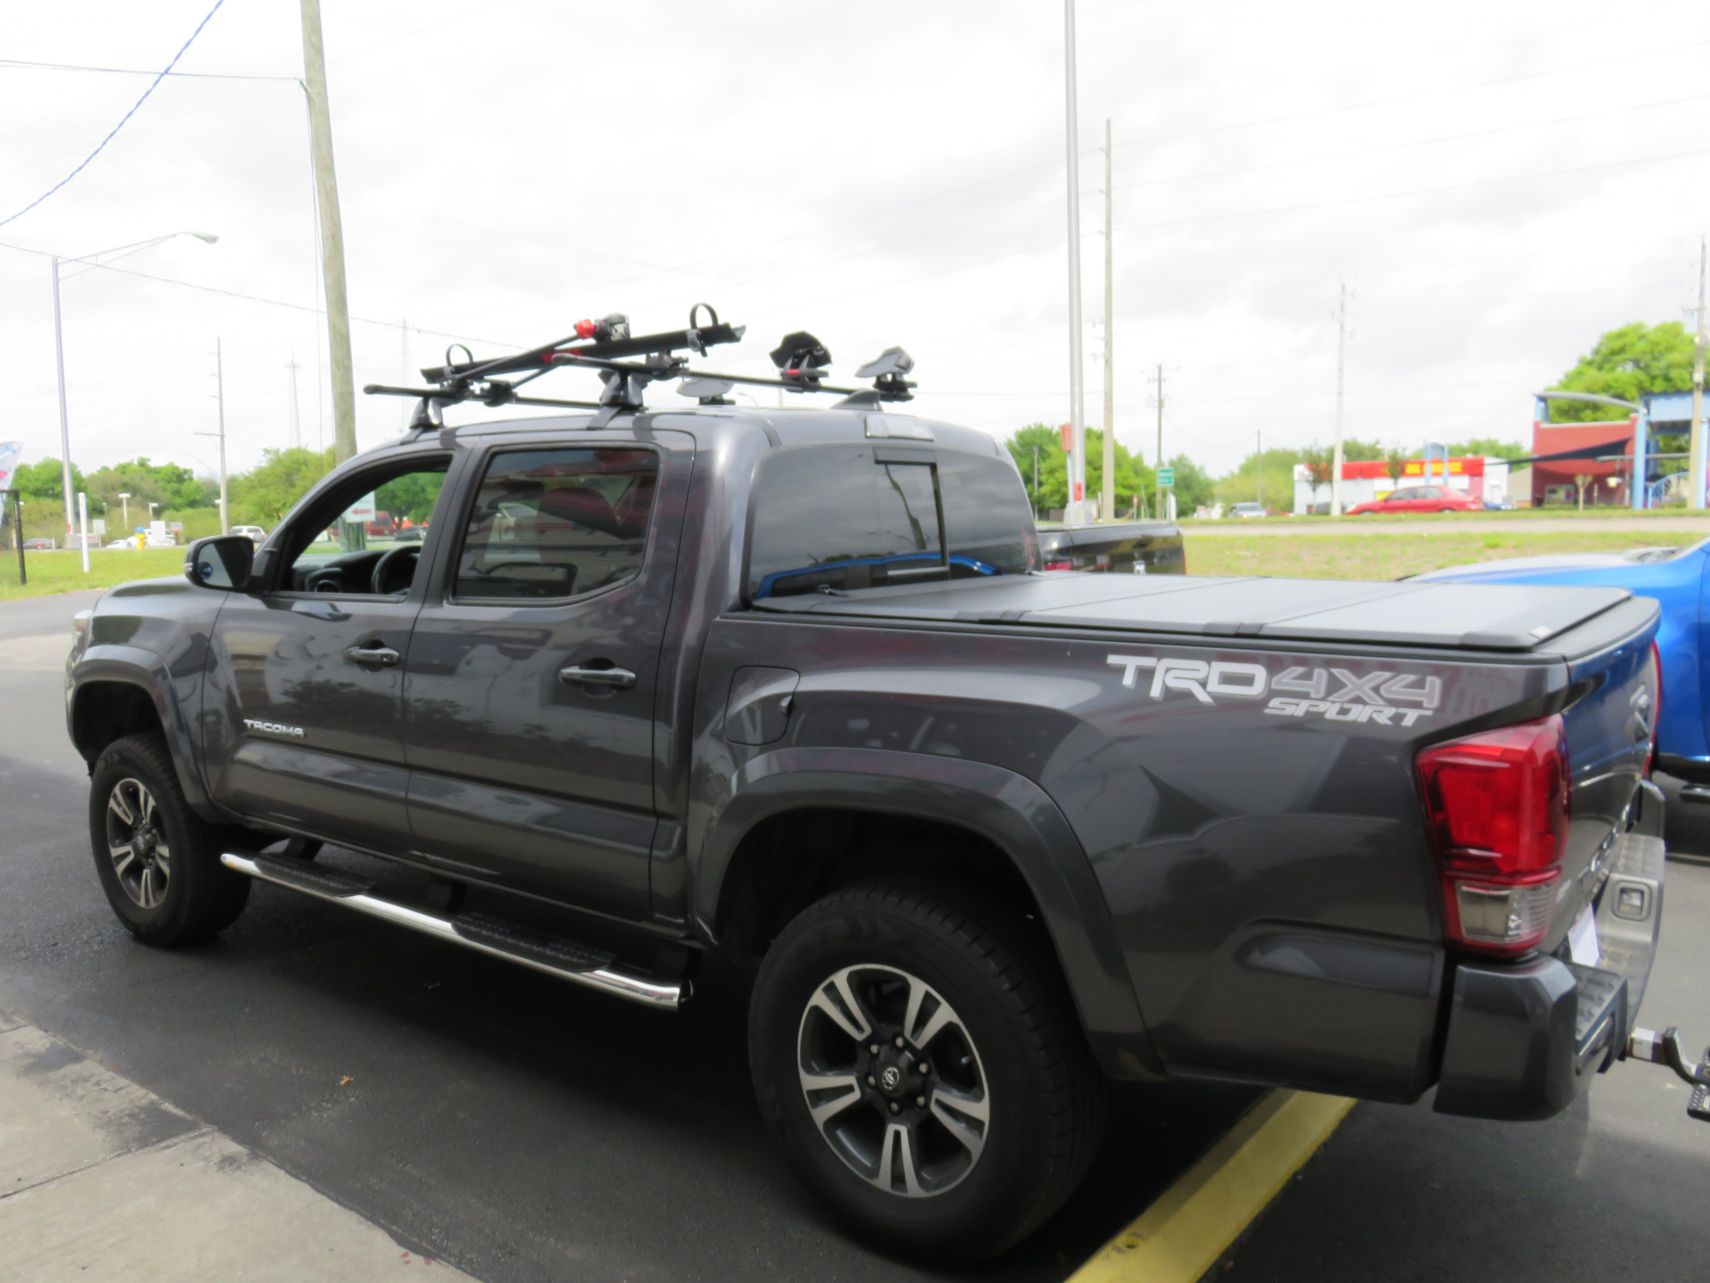 Toyota Tacoma Leer 350m With Yakima Roof Rack Topperking Topperking